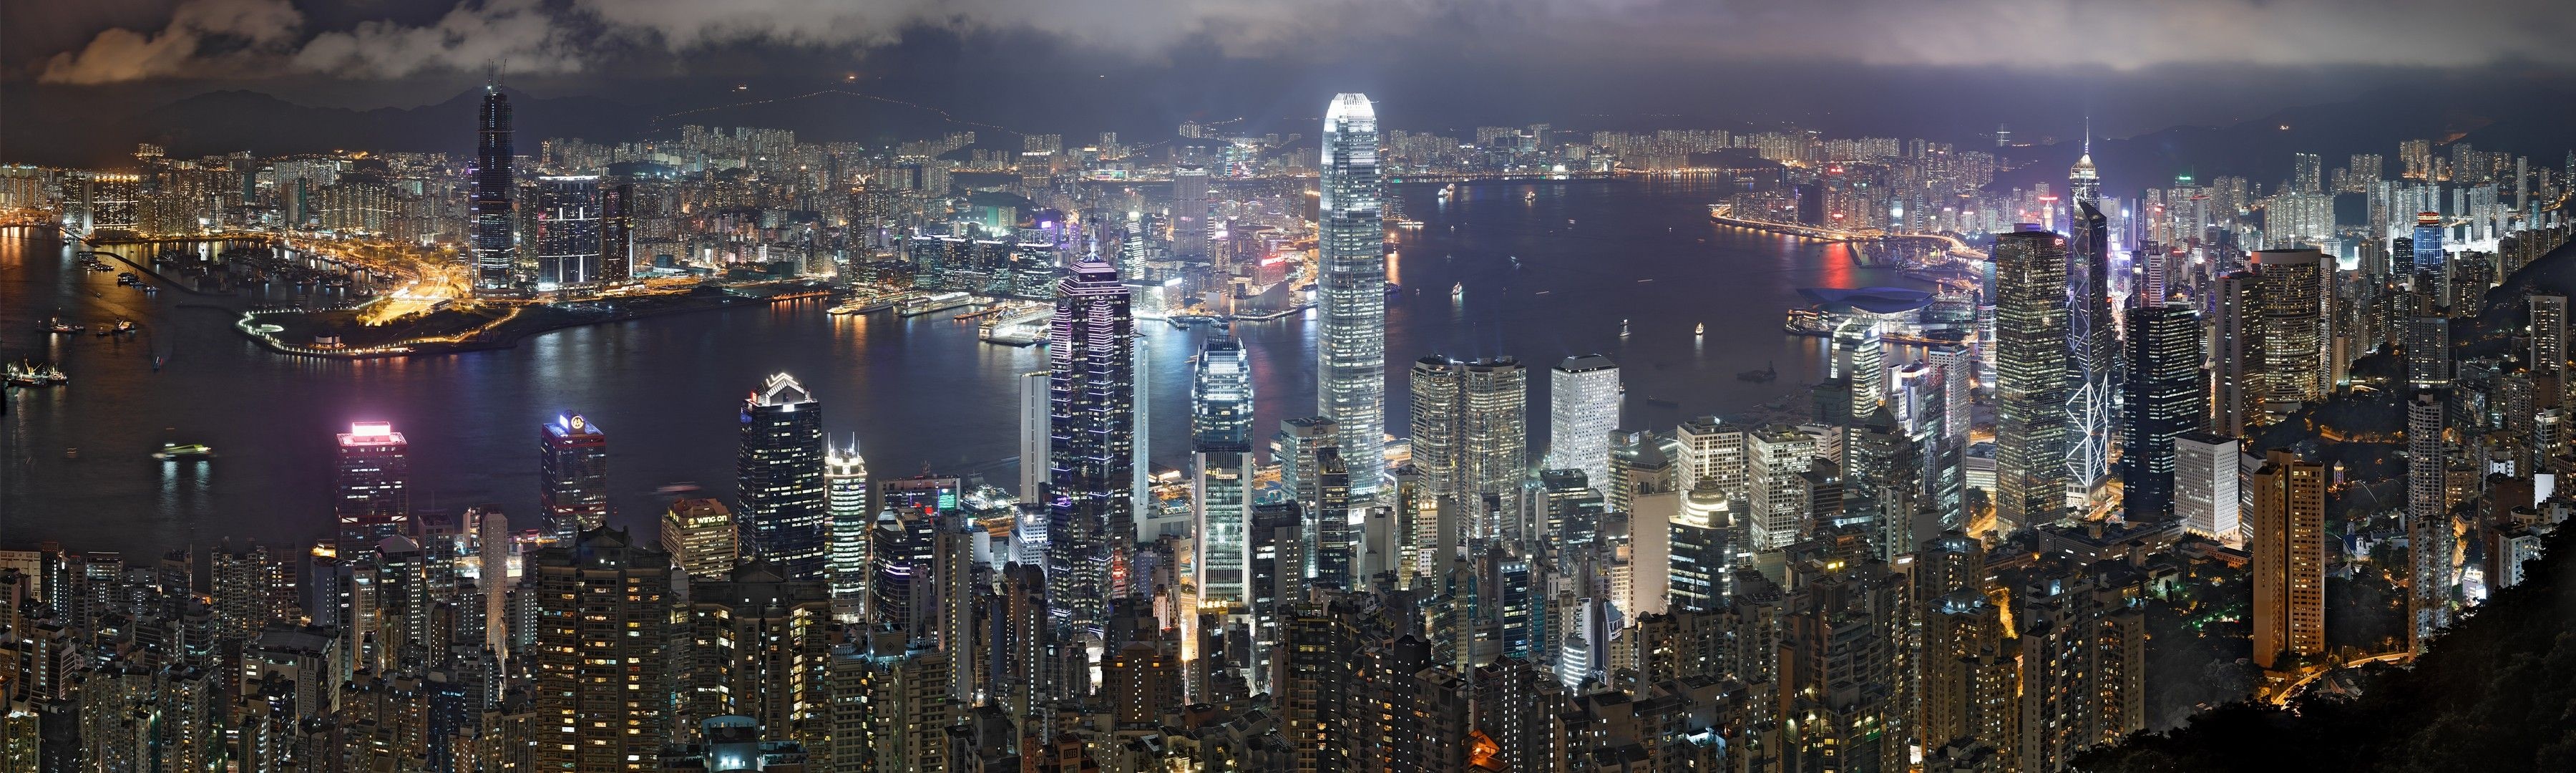 Cityscape: The view of Hong Kong bay, Financial district of the city, Water logistics, China. 3600x1080 Dual Screen Background.